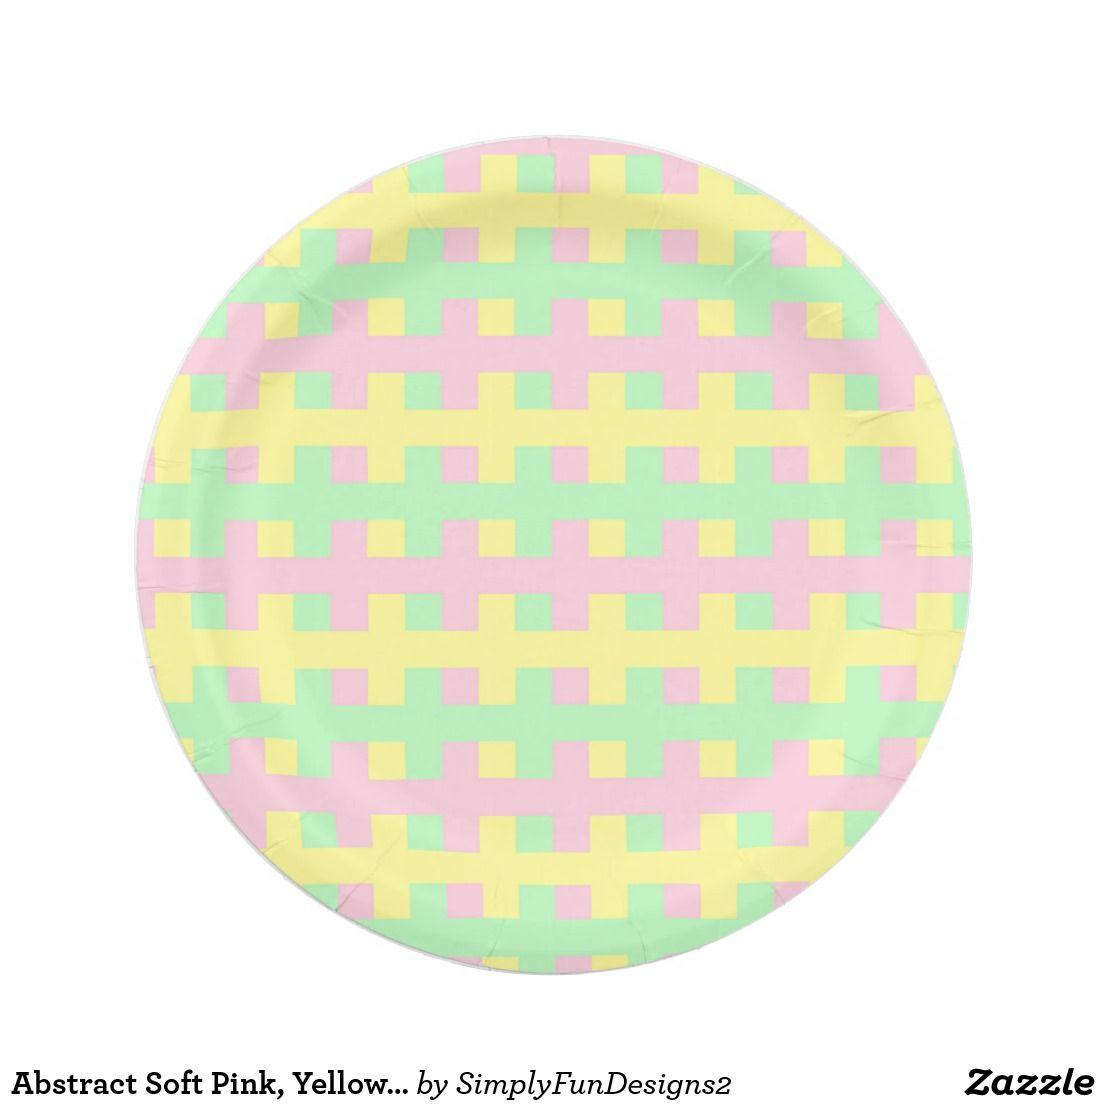 Pink Yellow Green Circle Logo - Abstract Soft Pink, Yellow and Green Paper Plate. Zazzle products